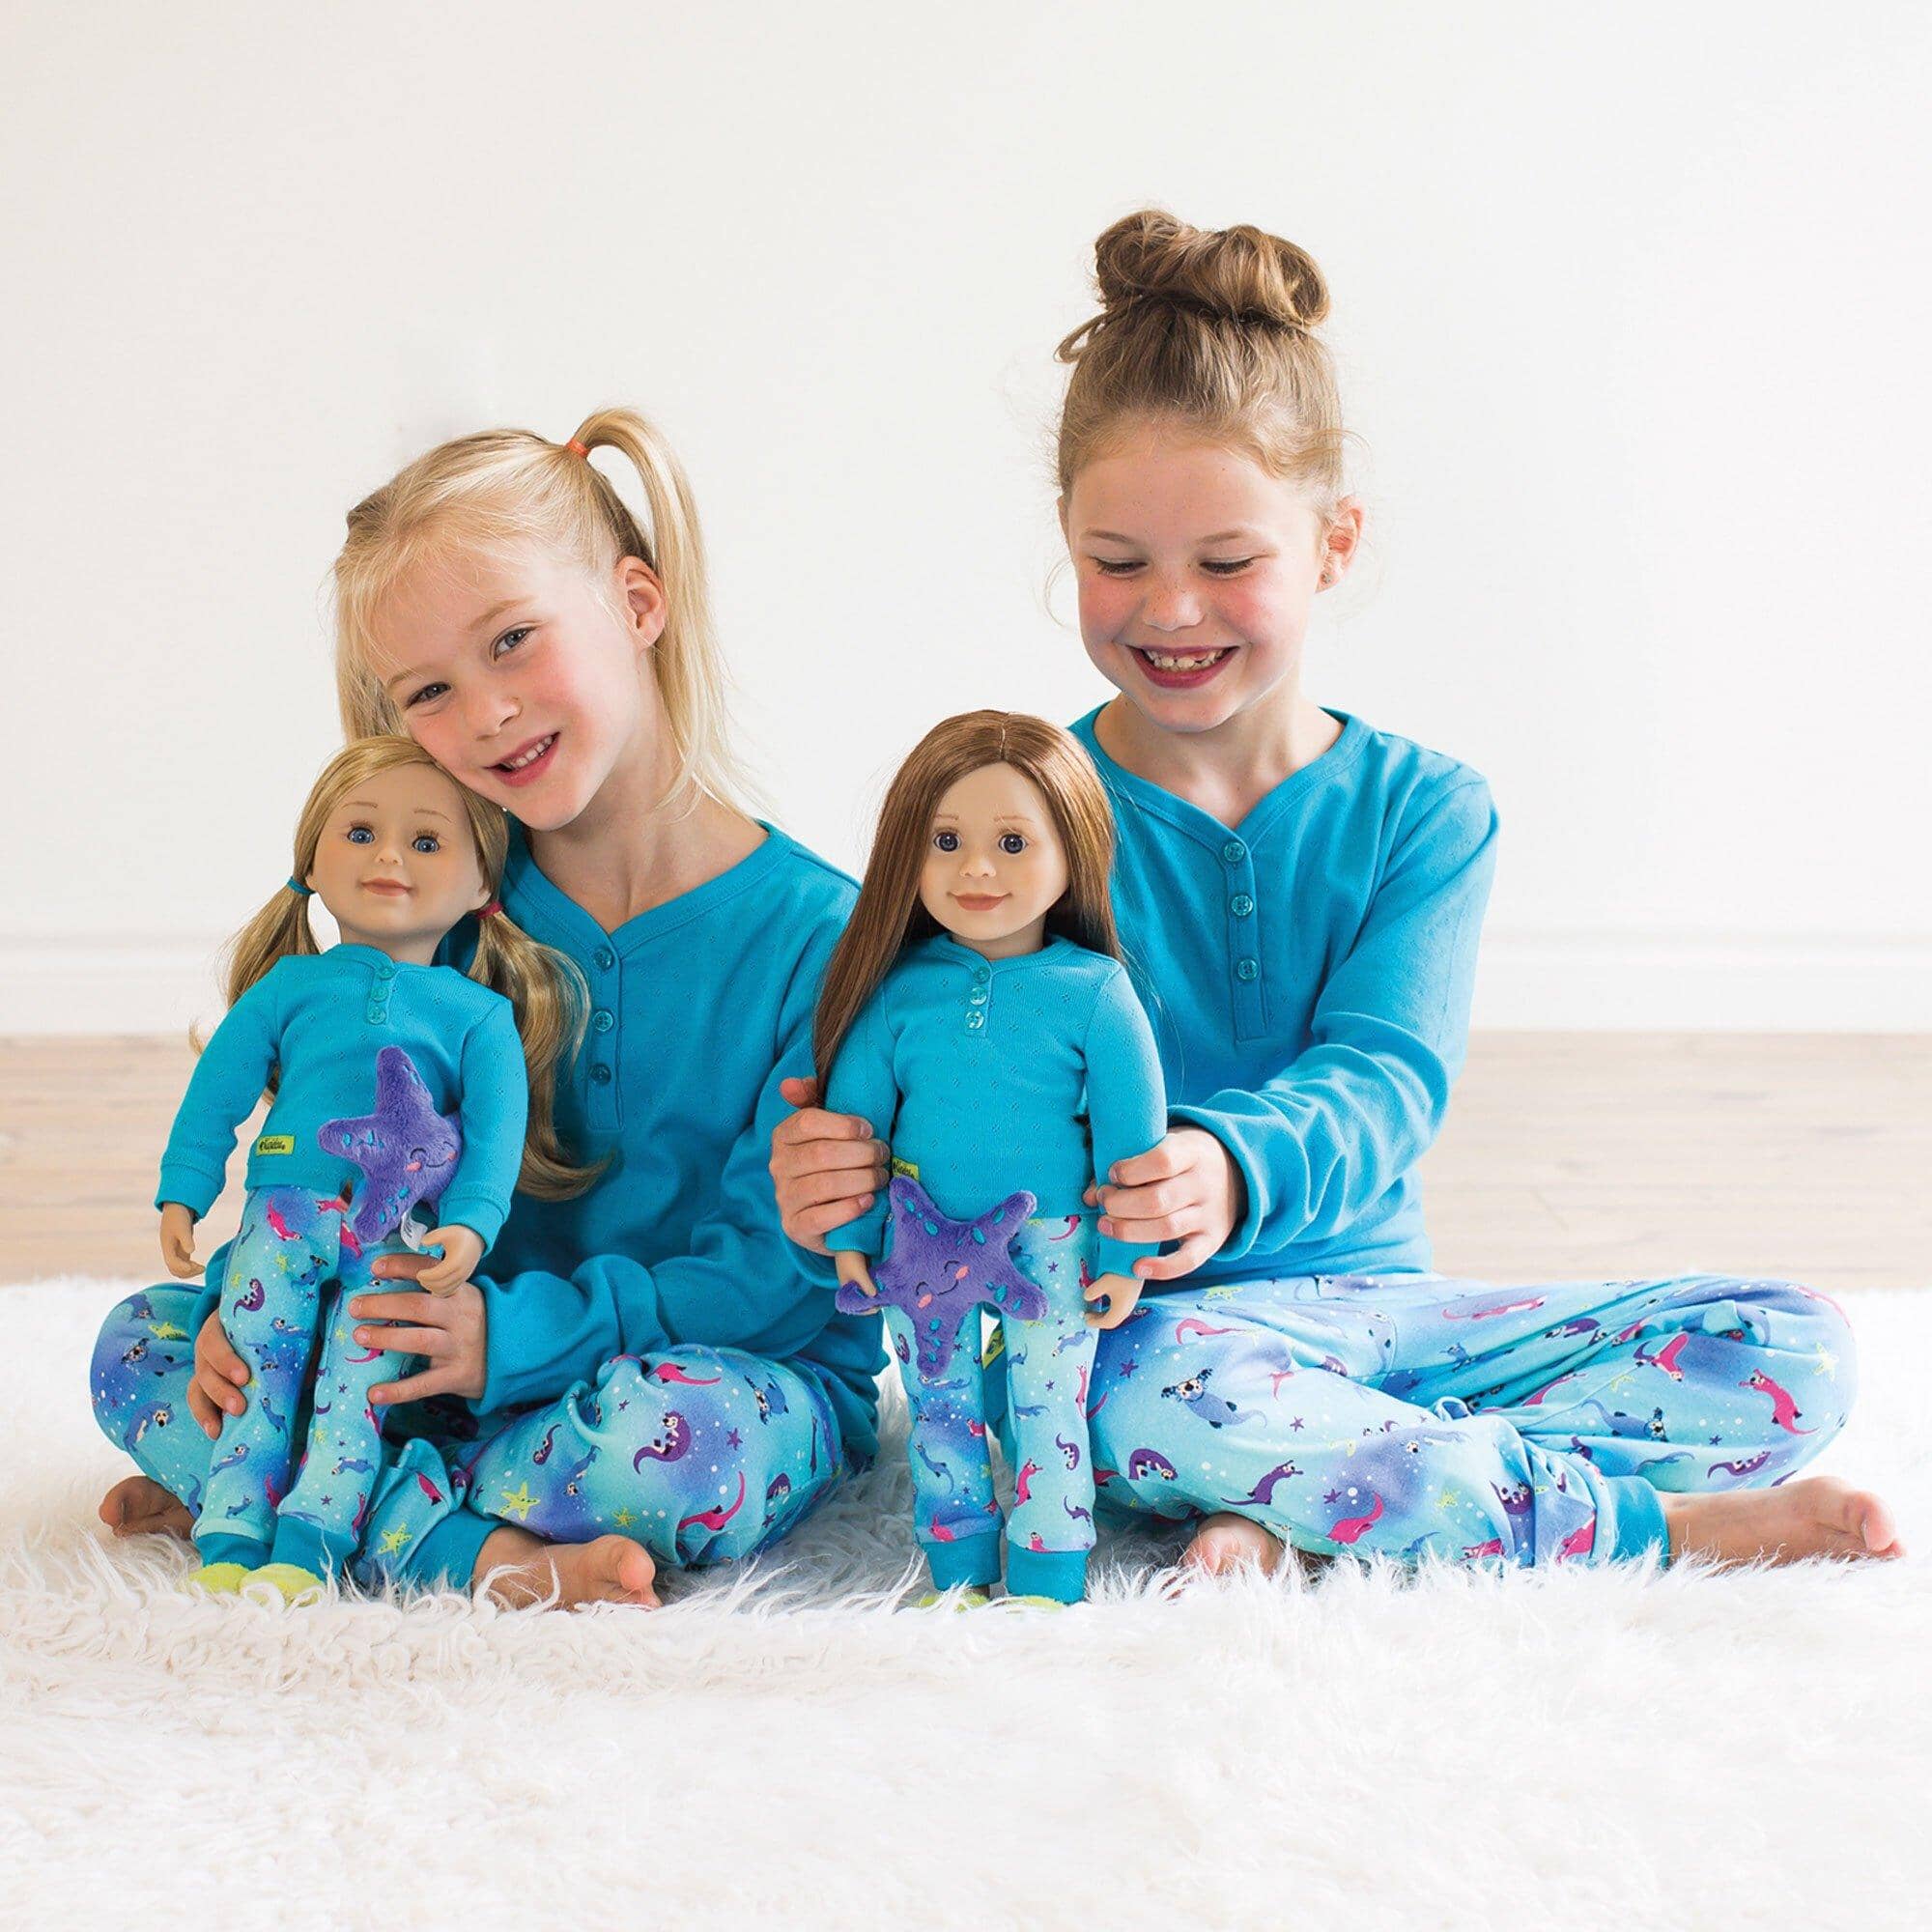 Maplelea  Forest Snow PJs for Dolls